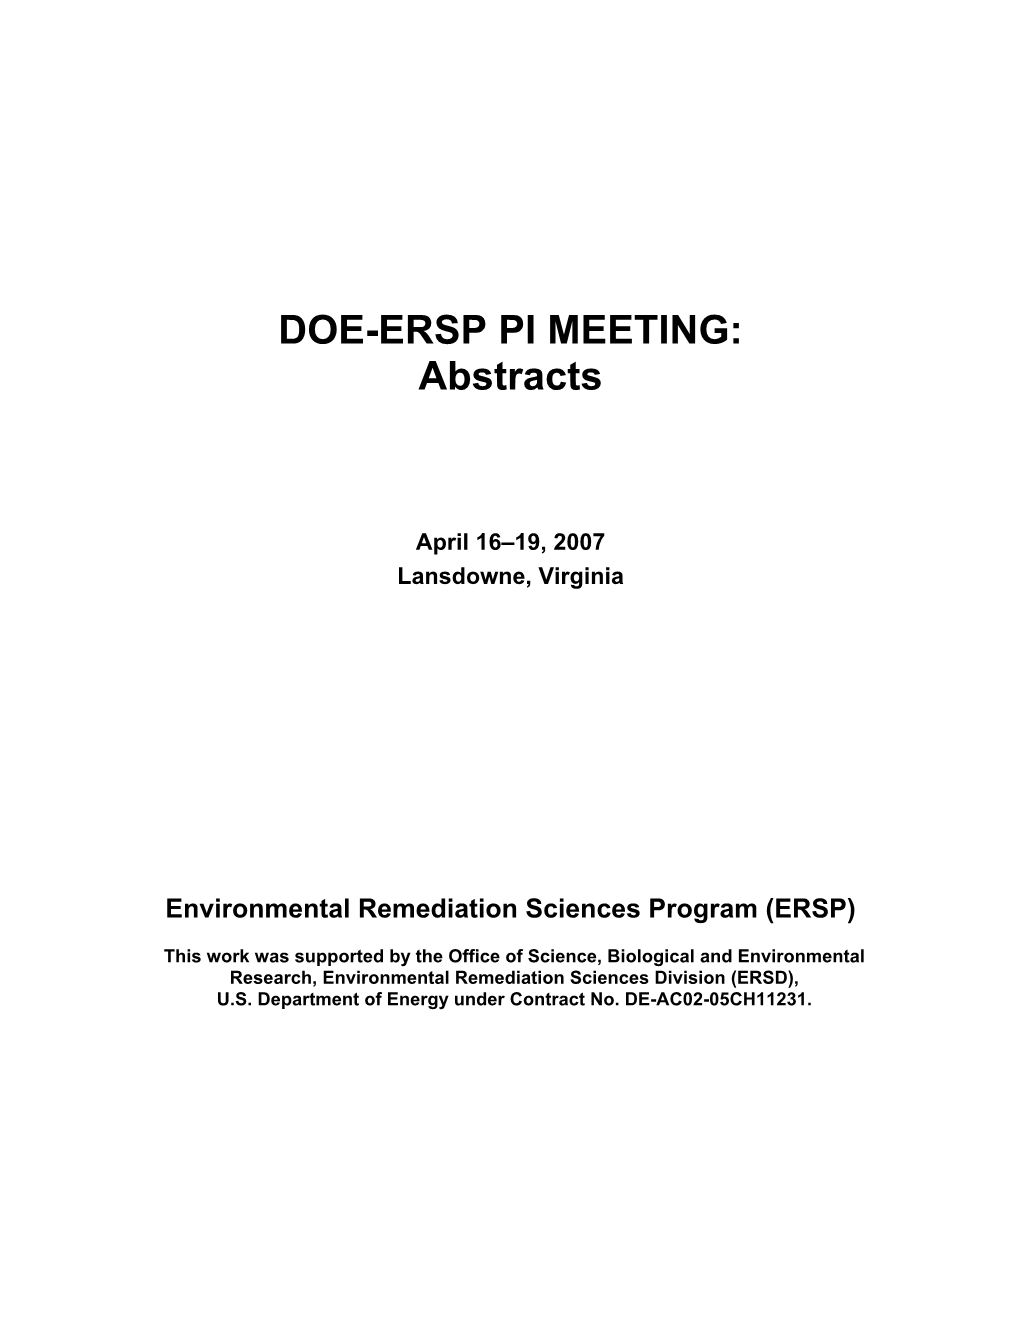 DOE-ERSP PI MEETING 2007 Abstracts